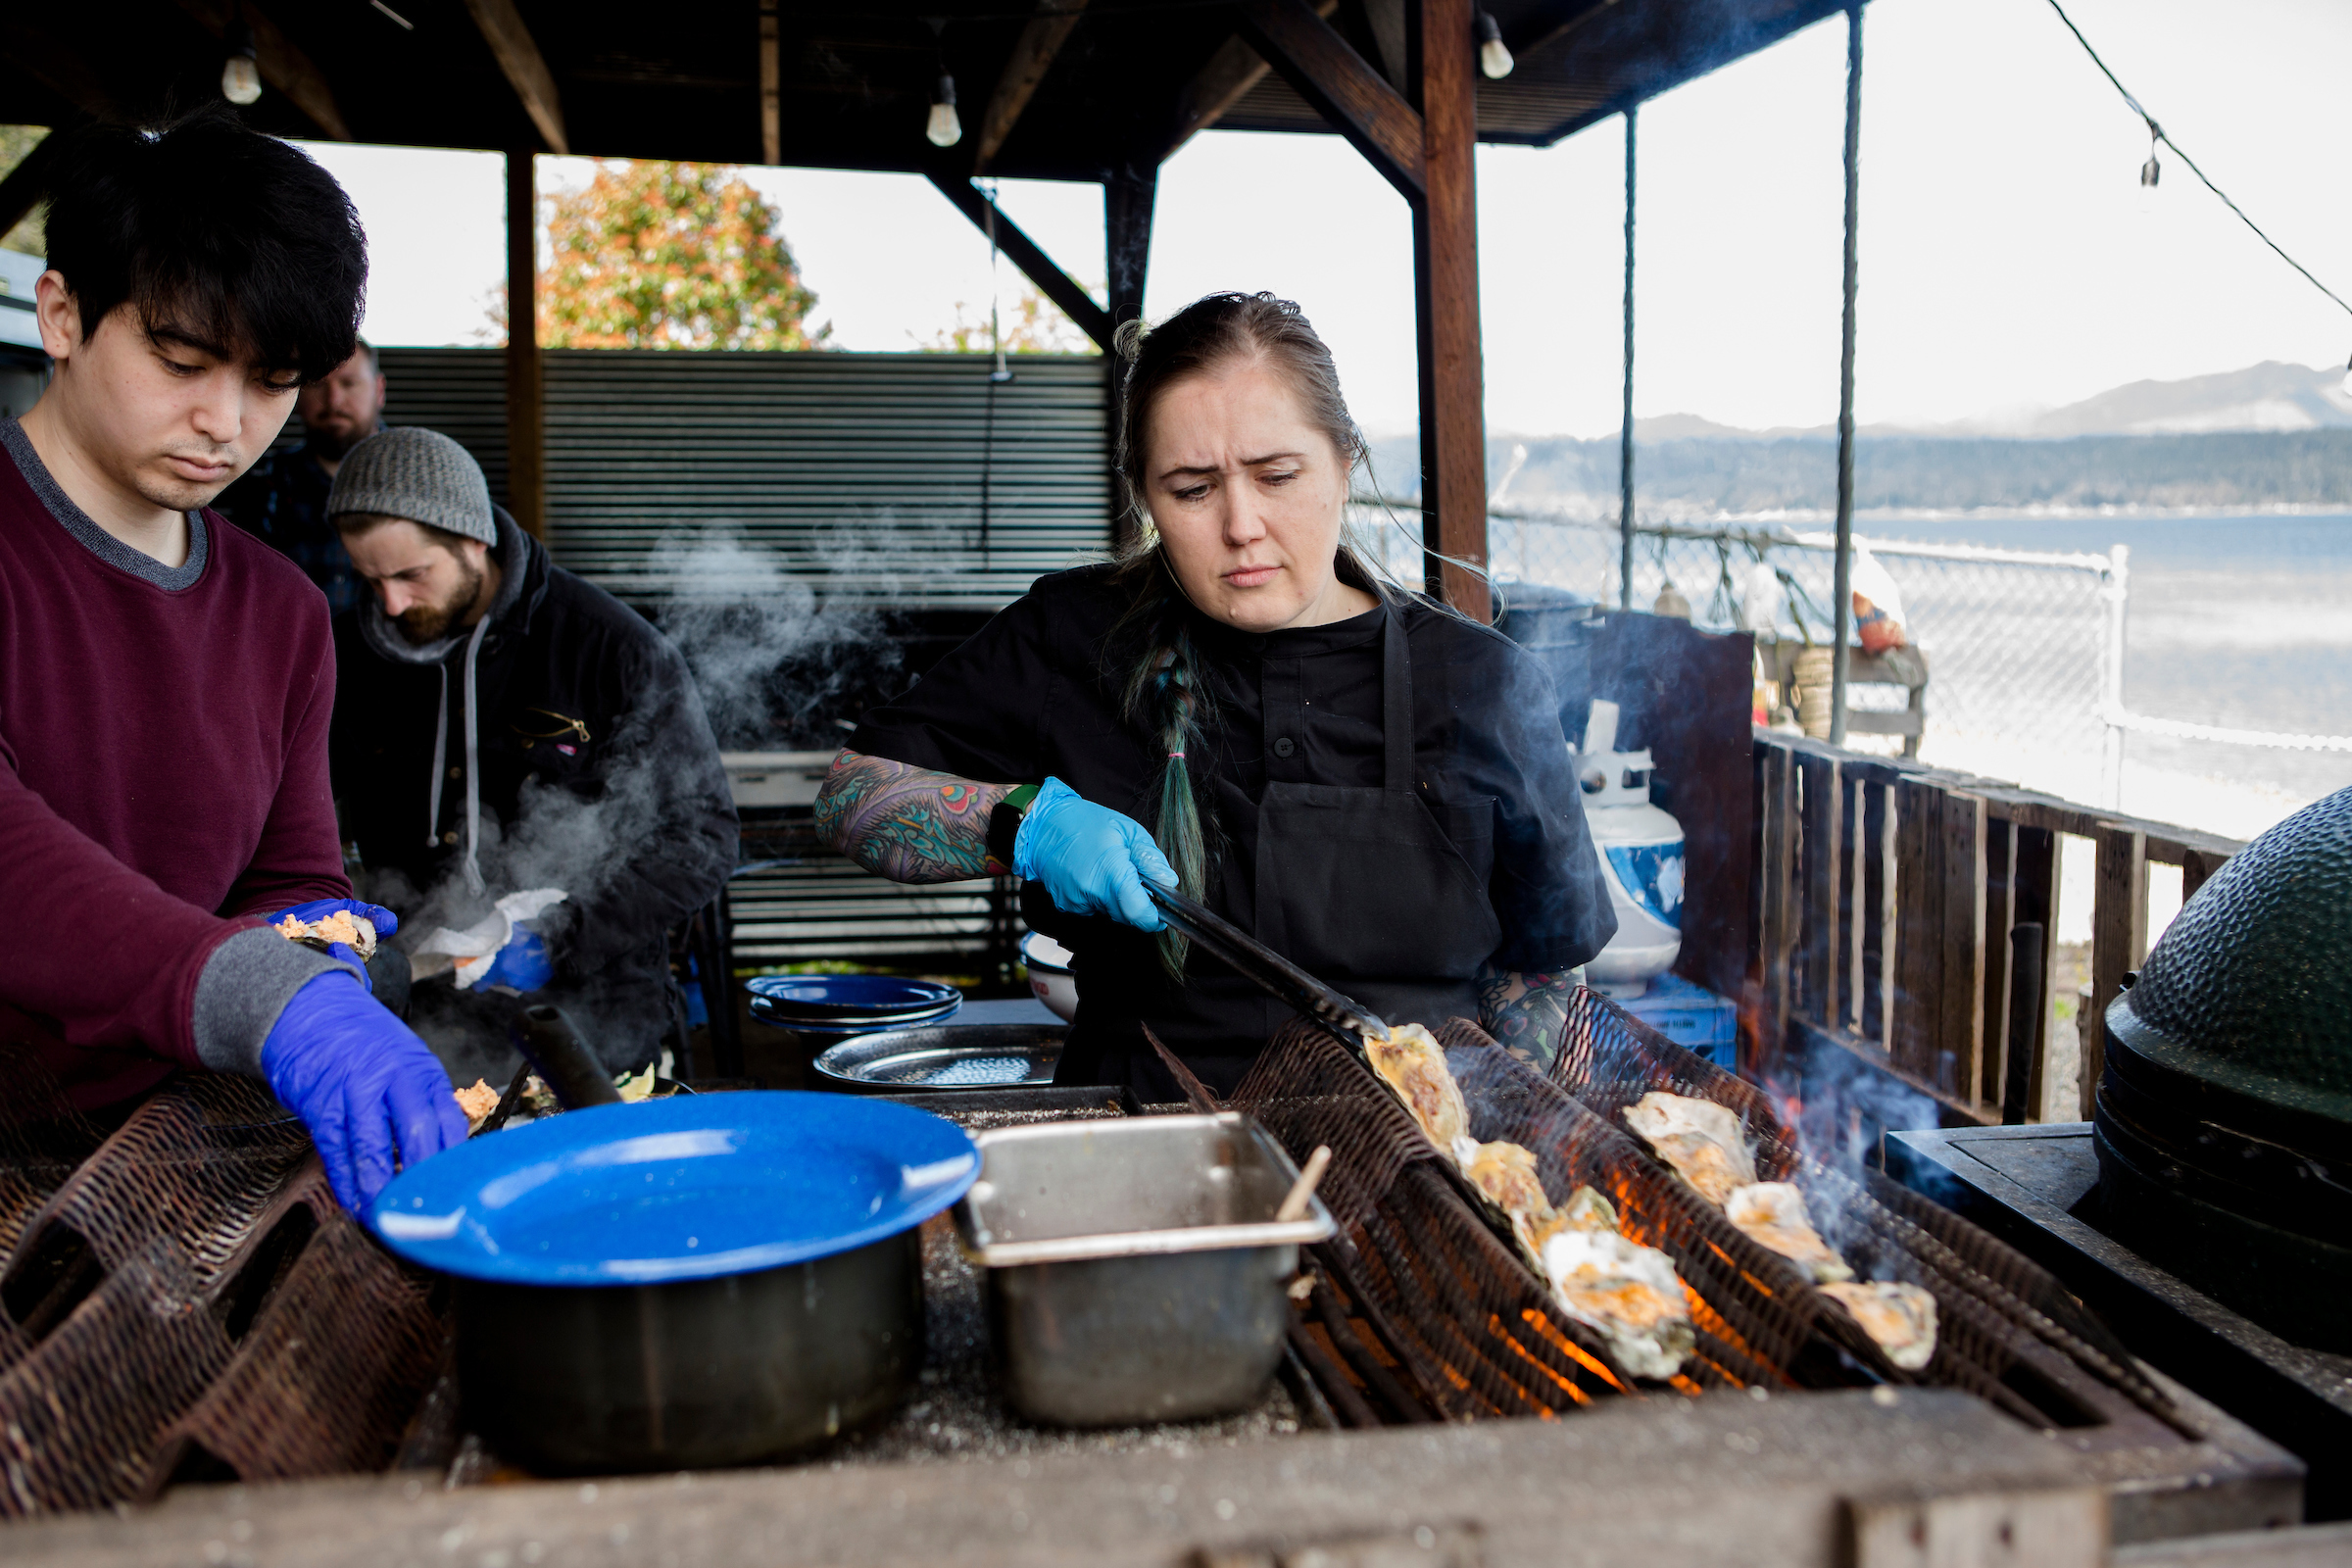 Executive Chef Sara Harvey cooking oysters over an open fire at Hook & Fork eatery in Union, Washington